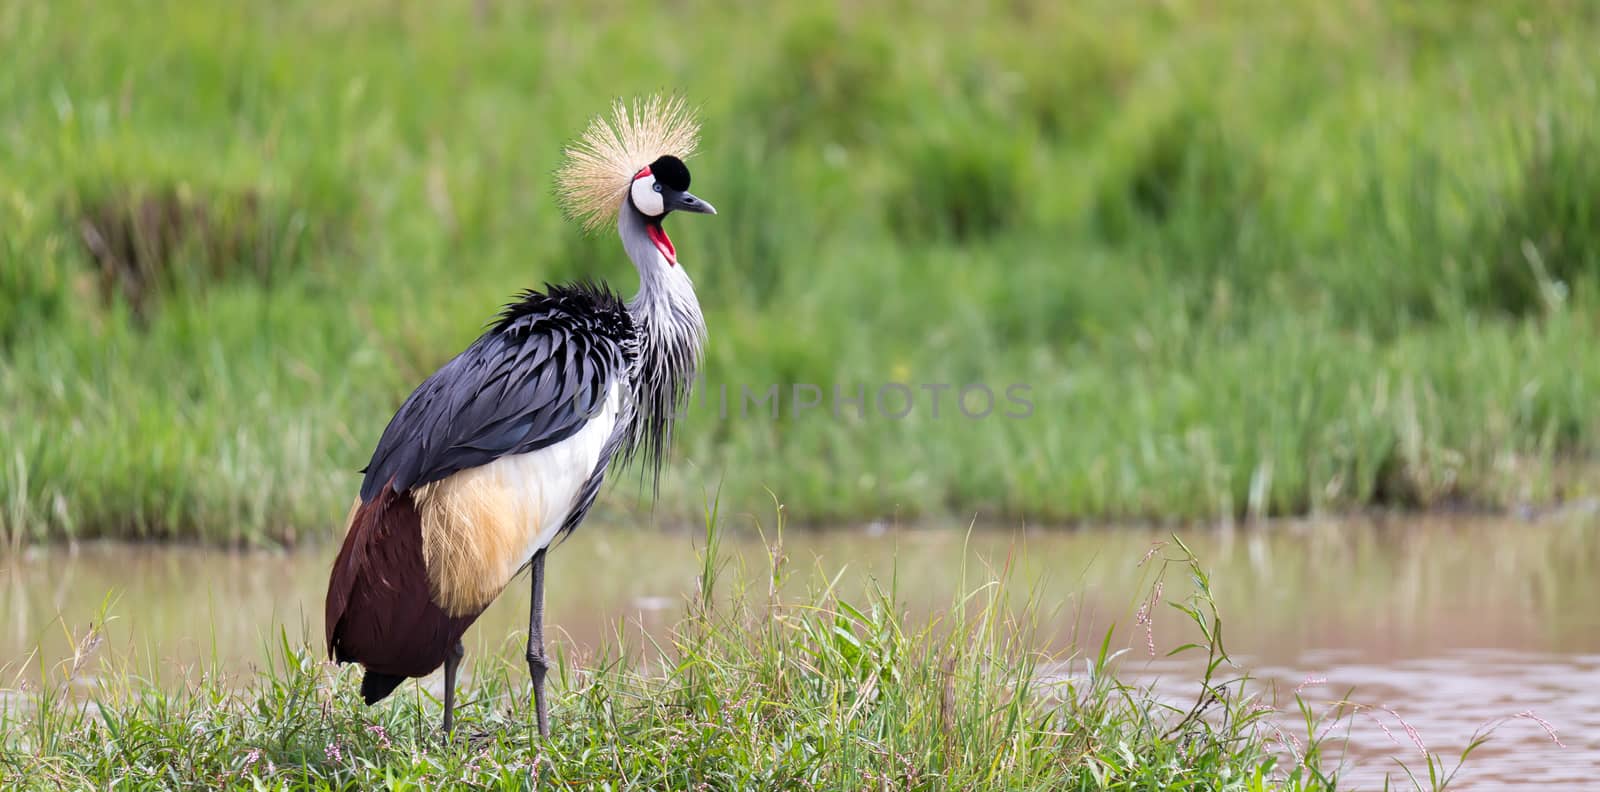 One gray-necked crowned crane stands on the bank of a river